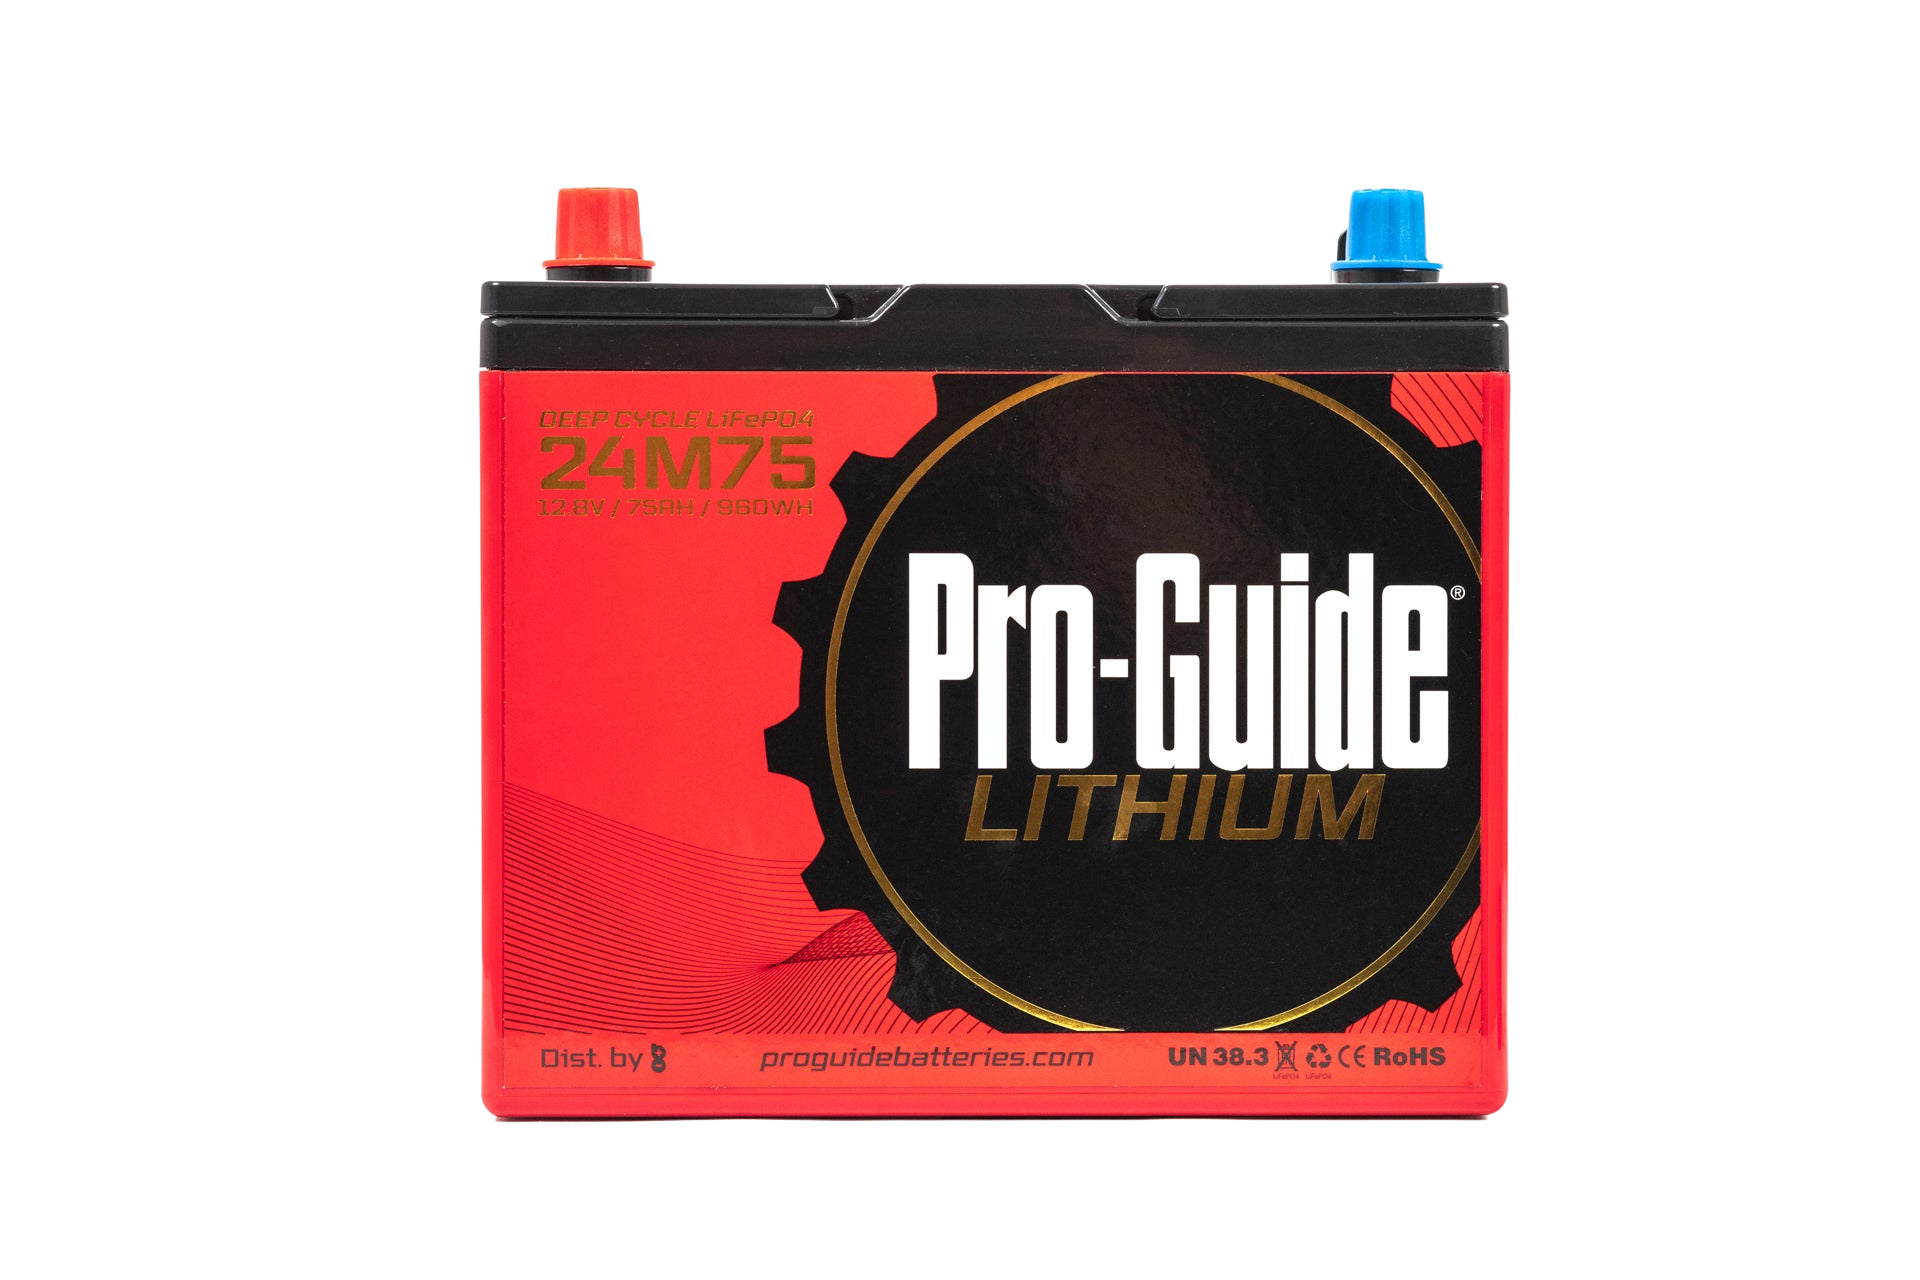 Pro-Guide Lithium Group 24M75